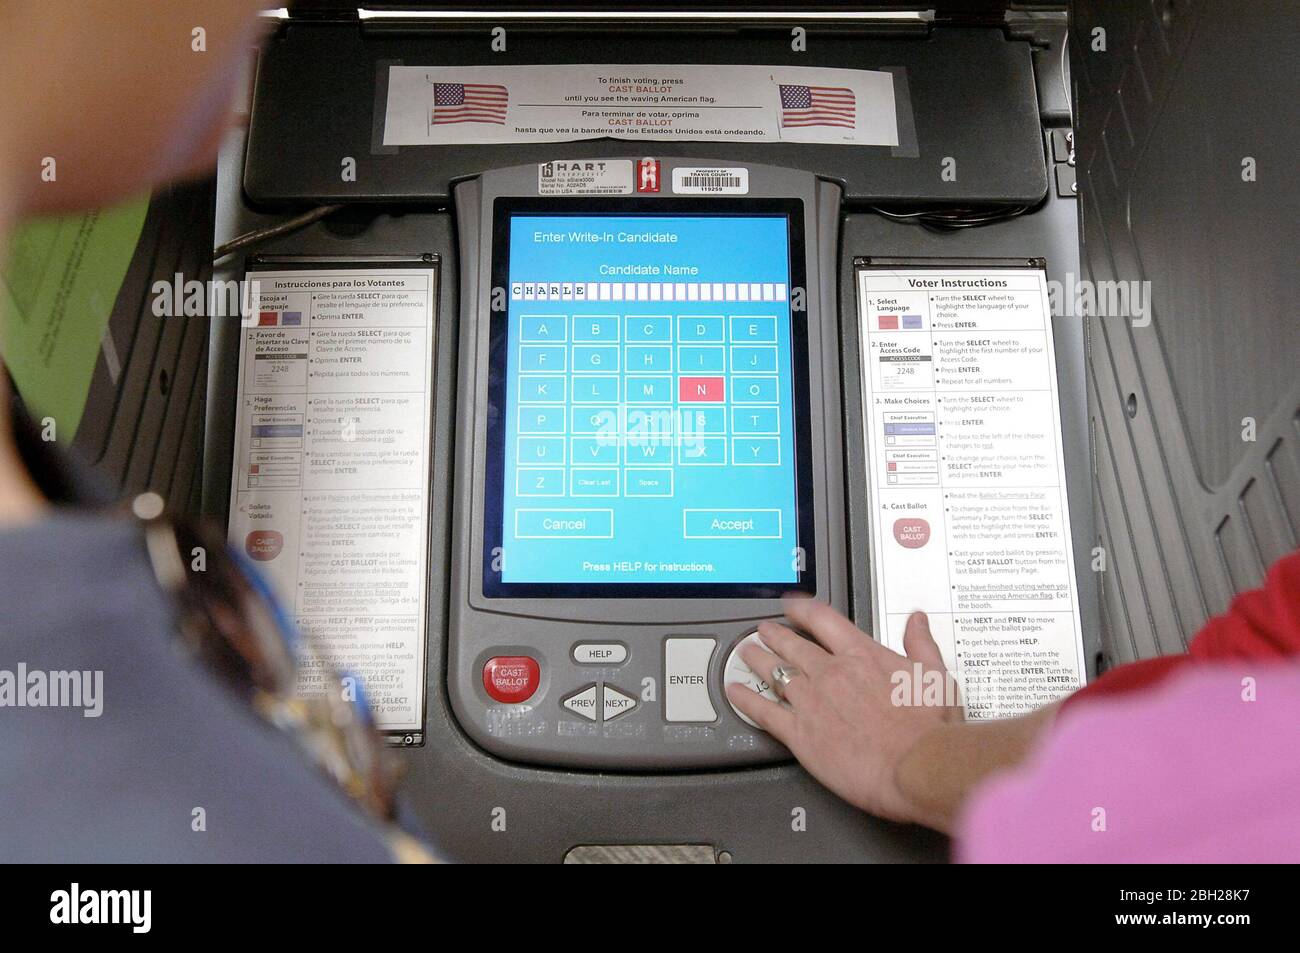 Austin, Texas USA, November 3, 2006: An election trainer demonstrates the difficulty of casting a write-in vote on the E-Slate electronic voting machines used in many Texas counties for the November election. ©Bob Daemmrich Stock Photo